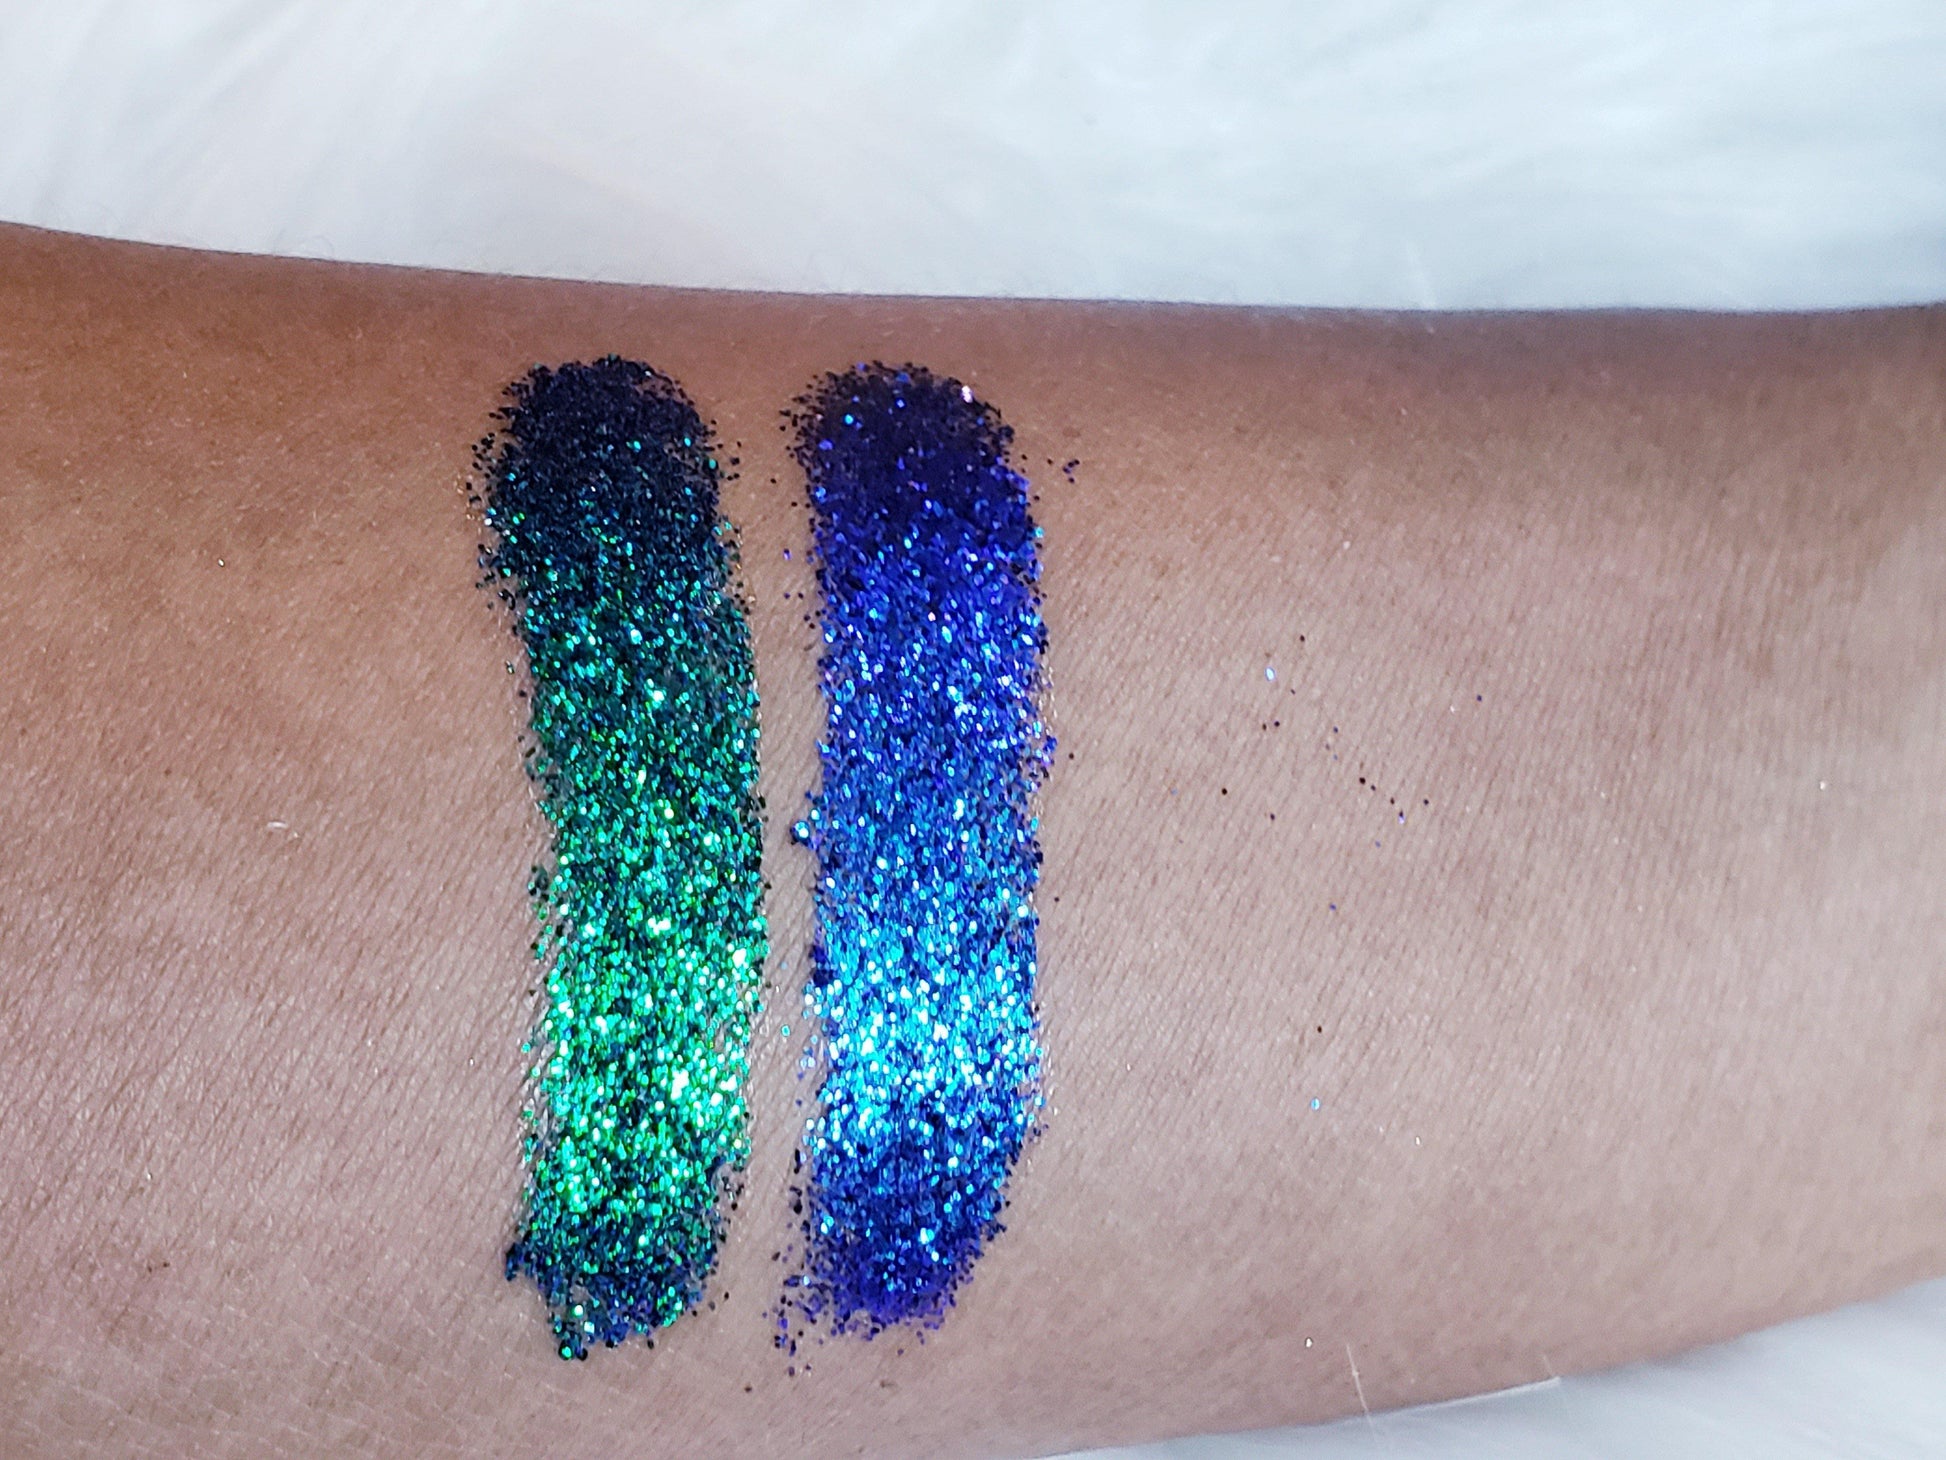 Holographic Chameleon Glitter Eyeshadow - She's A Beat Beauty